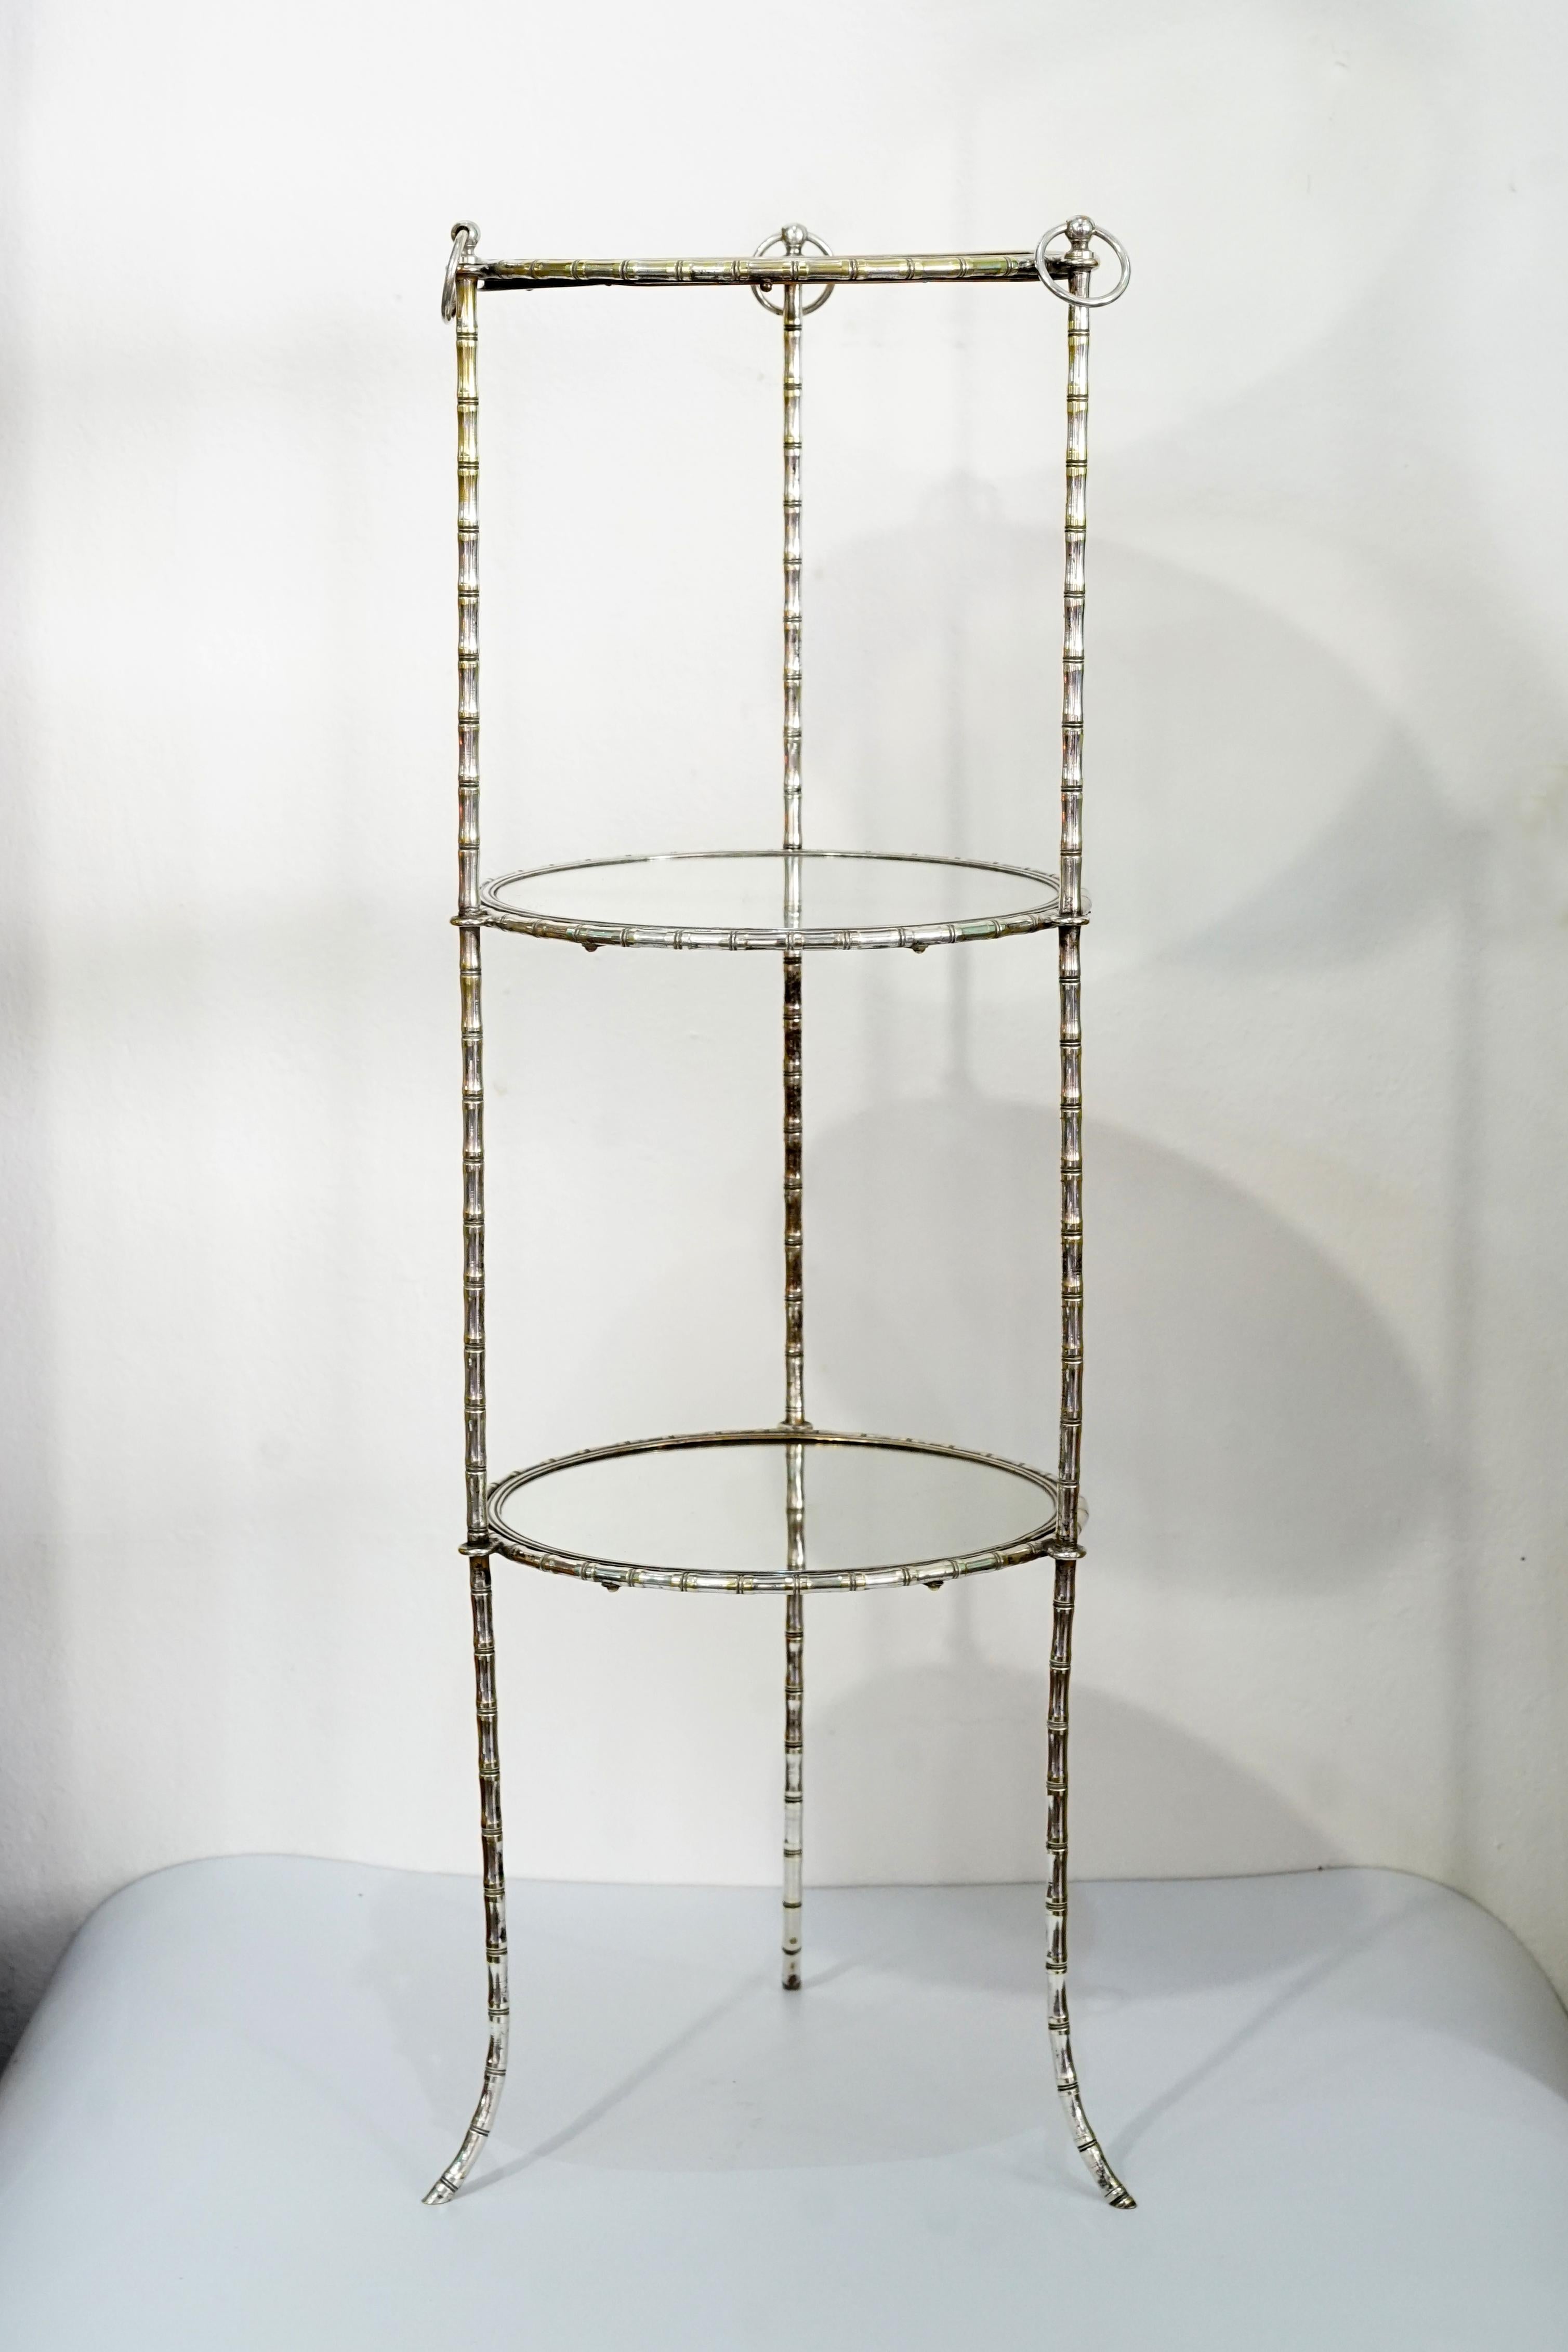 Maison Bagues France side table
3-plane side table
Materials: bronze and mirrored crystals
Design: bamboo
Its legs are slightly open at the bottom.
for better support and stability
Golden and silver patina with some natural wear due to use and the